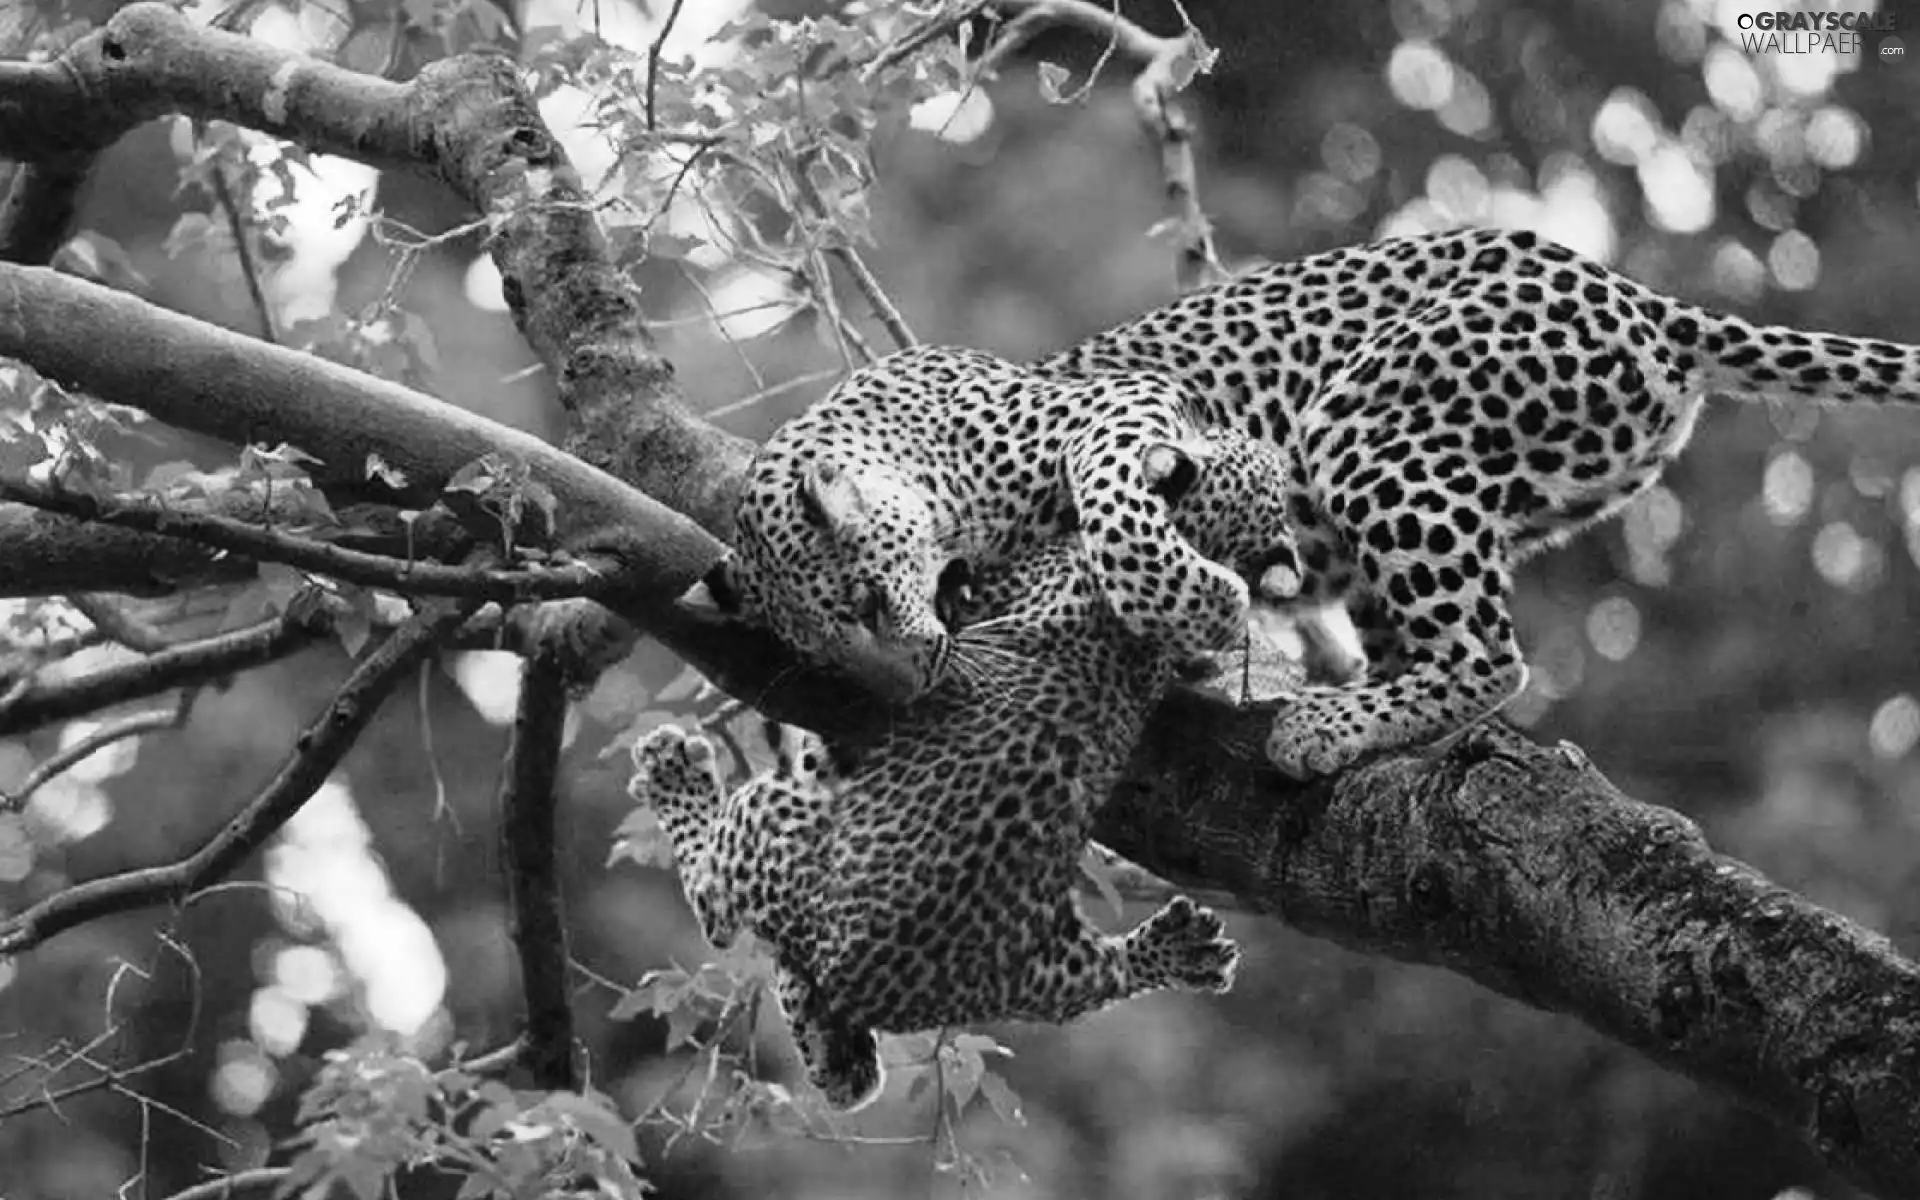 mother, Leopard, trees, small